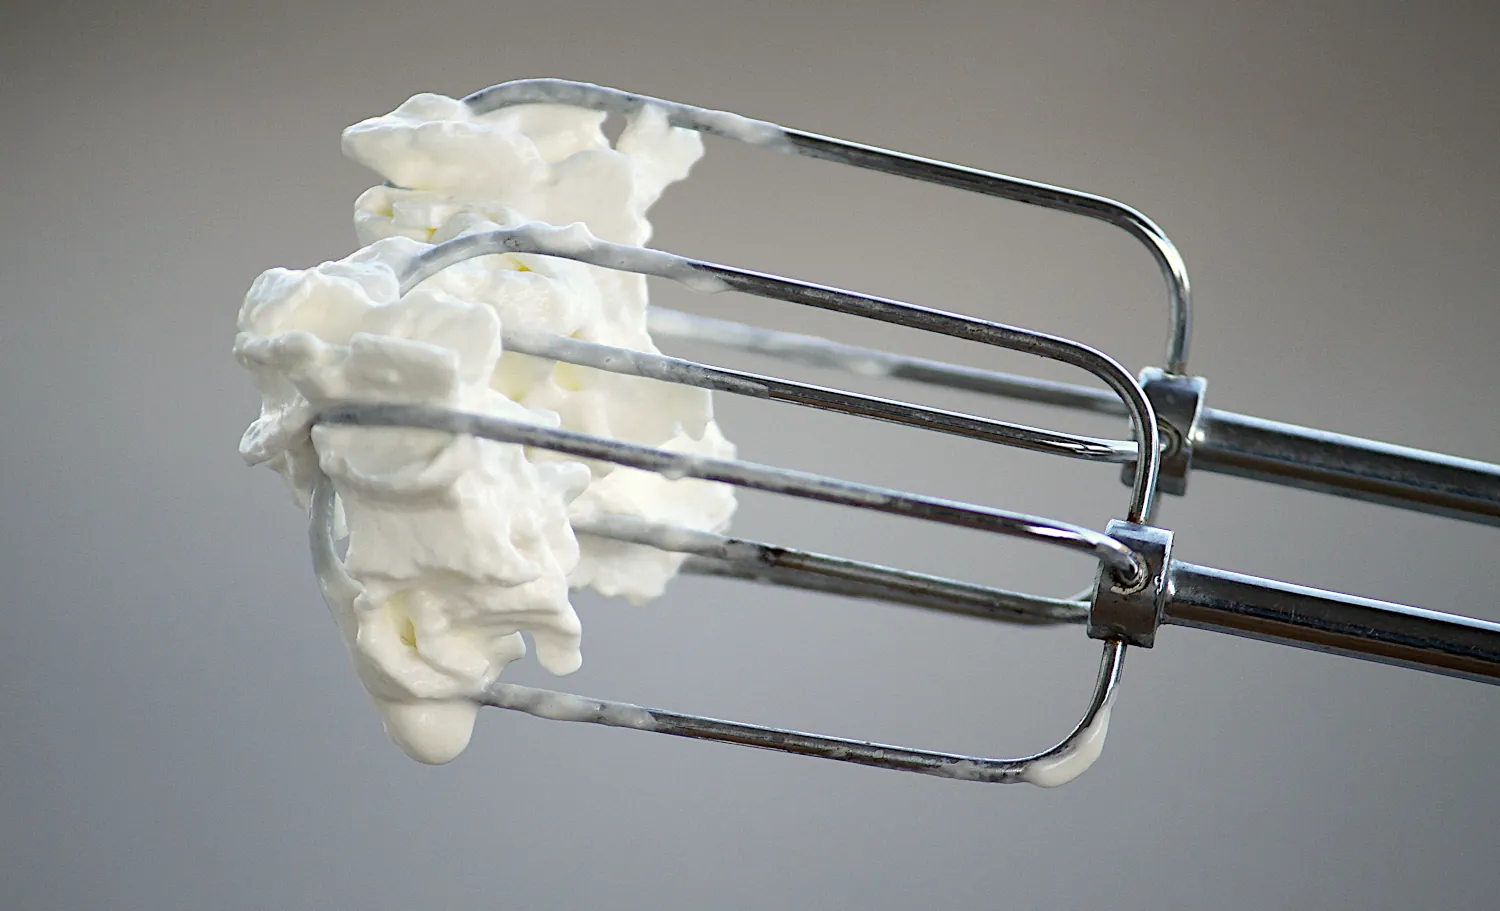 making whipping cream with a hand mixer